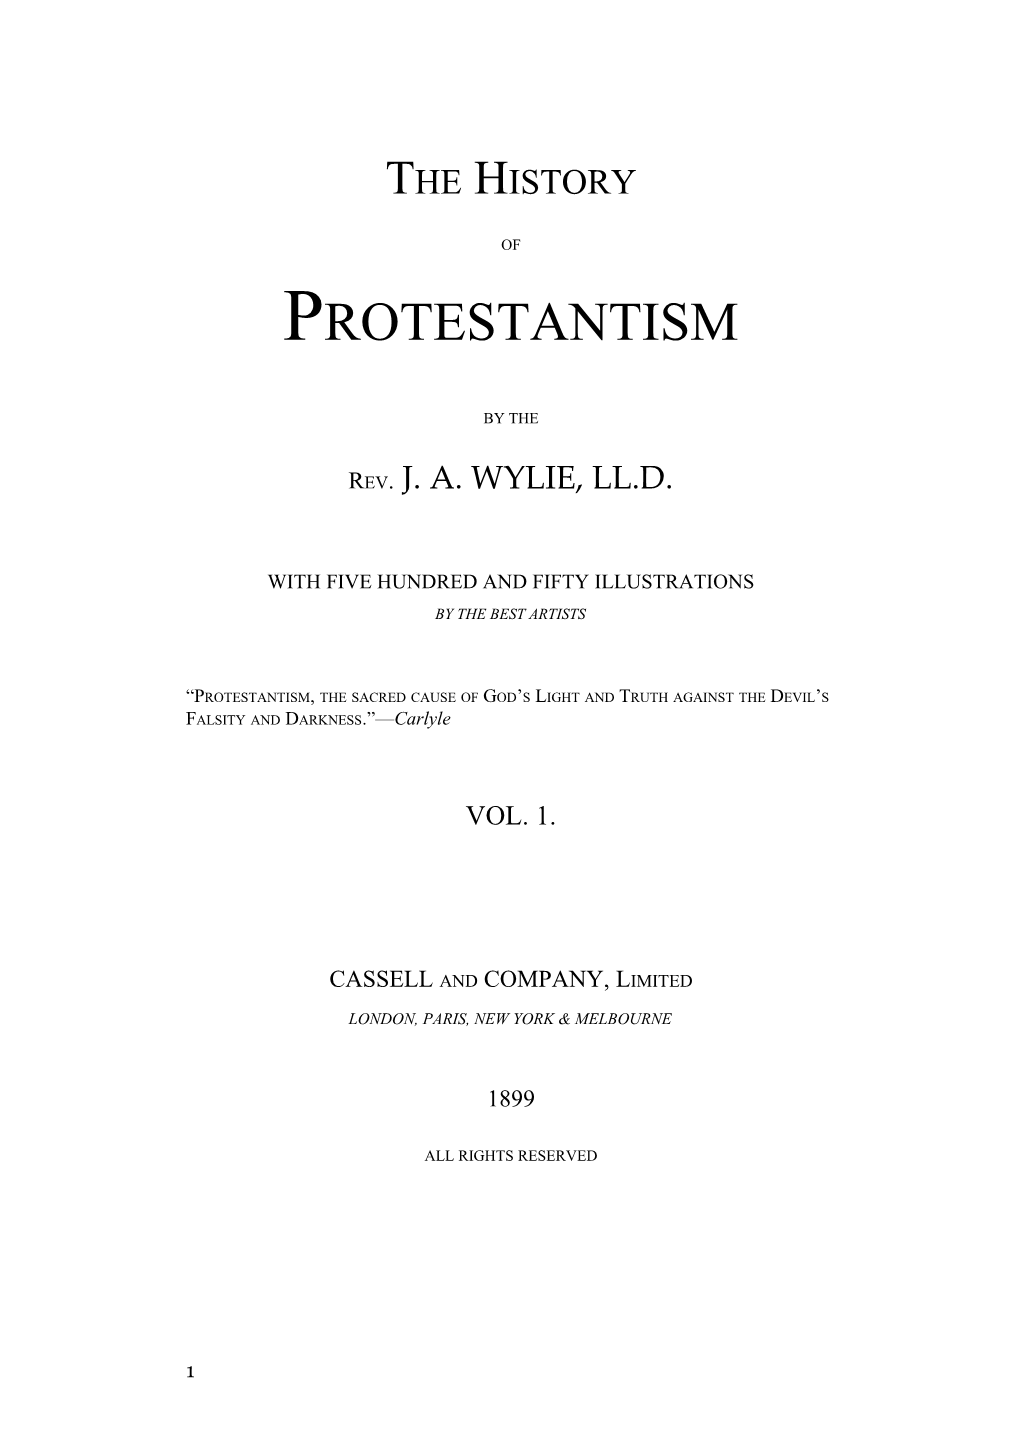 The History of Protestantism with Five Hundred and Fifty Illustrations by the Best Artist